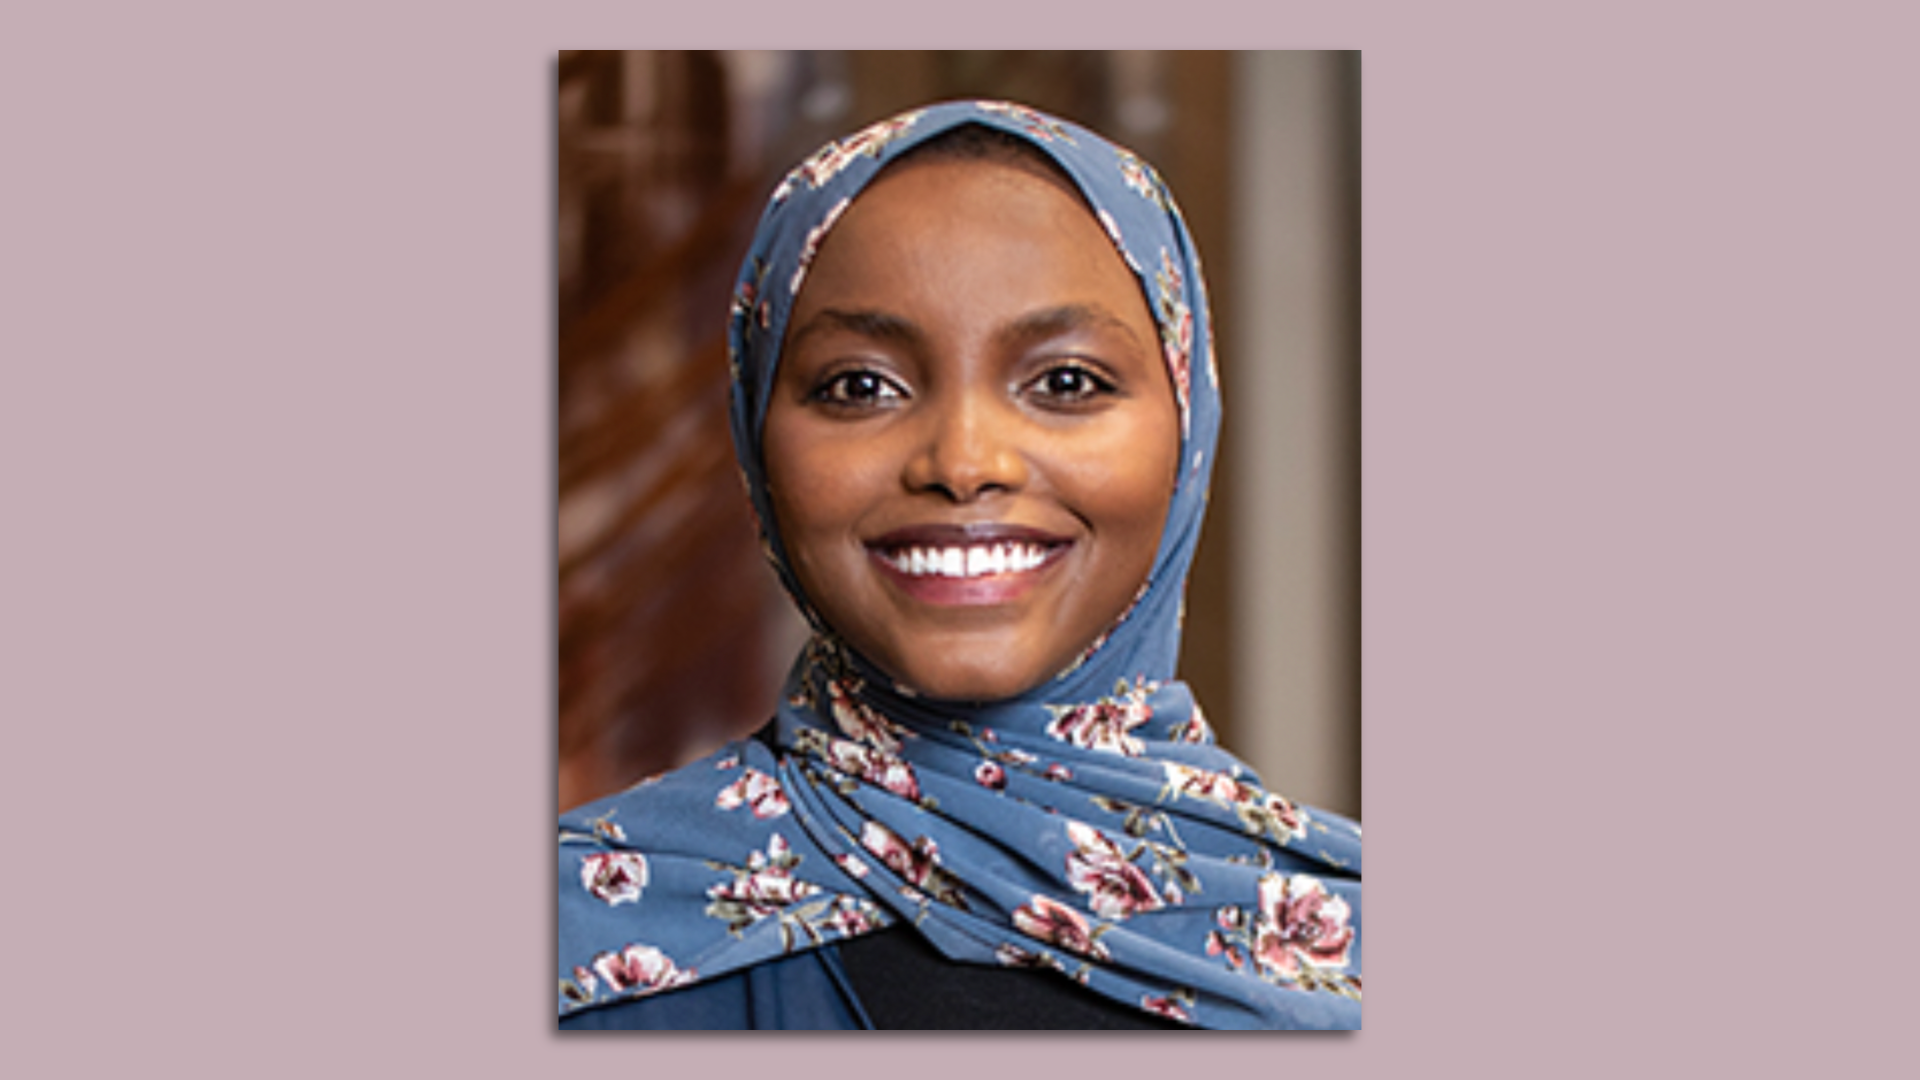 Woman with blue and flowererd hijab smiling